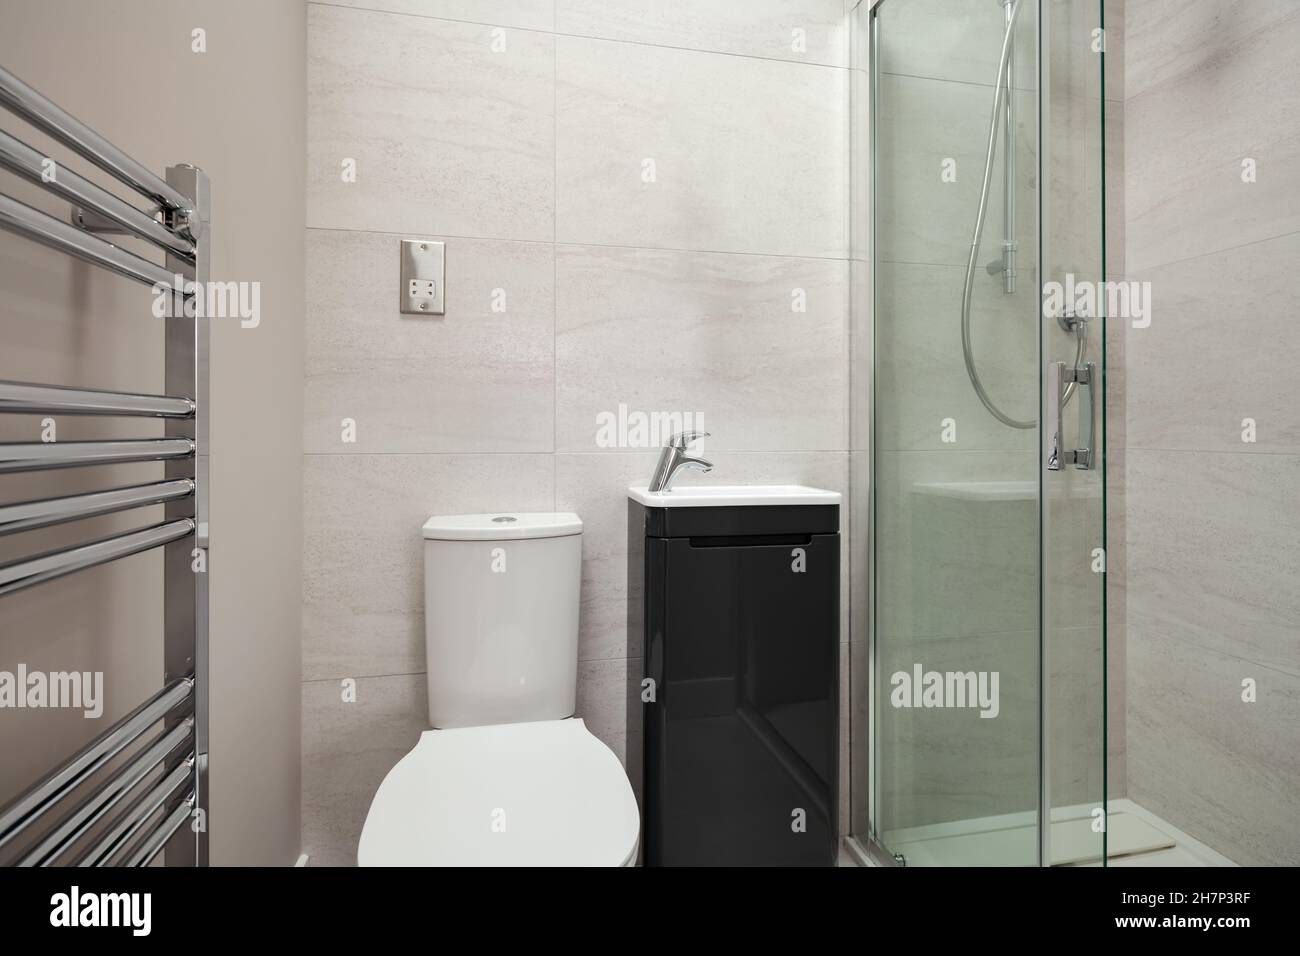 Compact shower room with toilet, wash basin and towel rail Stock Photo